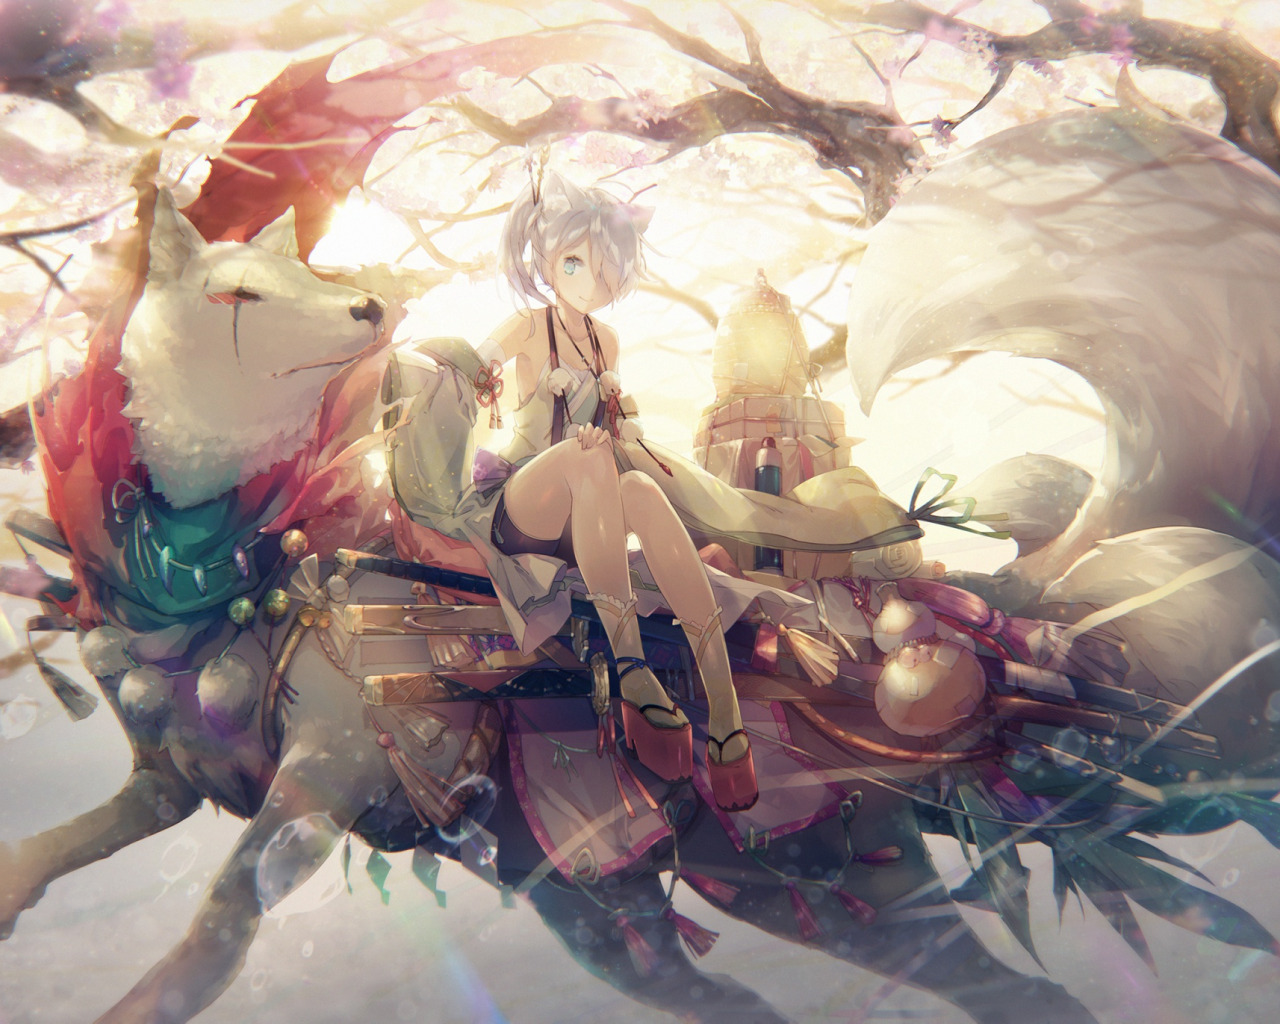 Download wallpaper wolf, anime, girl, section art in resolution 1280x1024